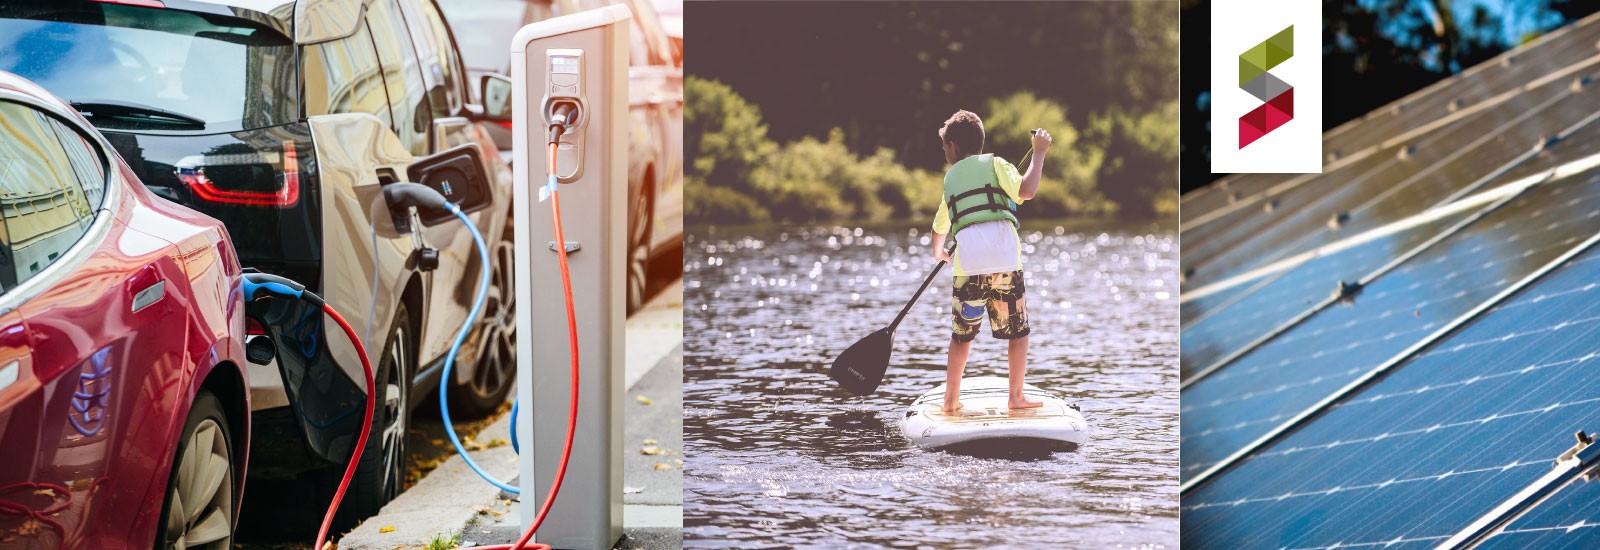 Imagethree photos. One: Electric vehicles charging. Two: boy on paddle board. Three: solar panels